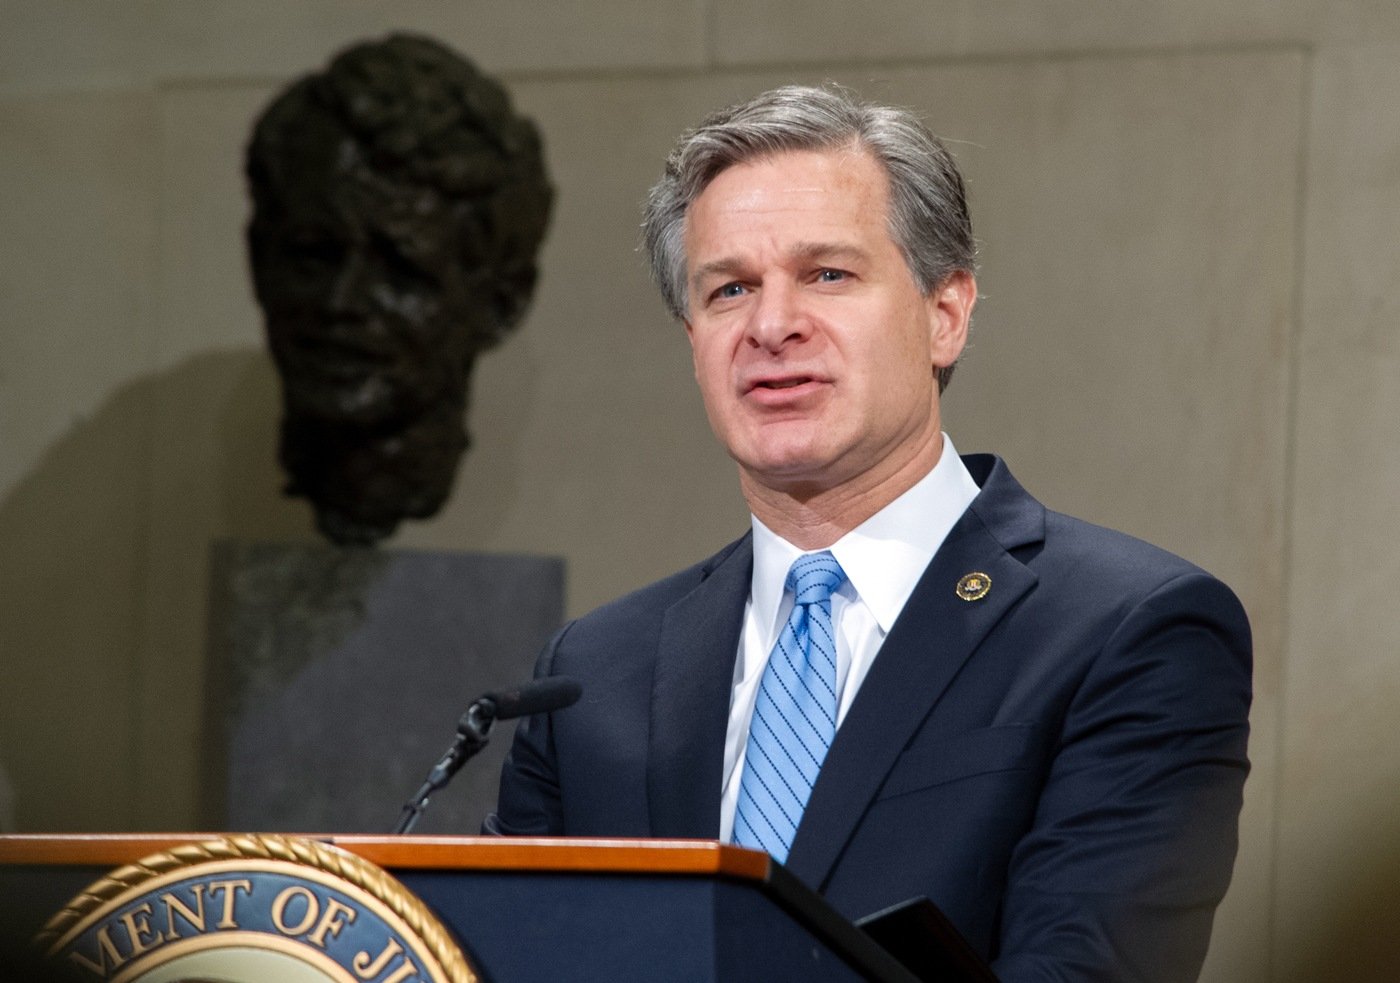 FBI Director Christopher Wray speaks during a summit on Lawful Access held October 4, 2019 at the Department of Justice in Washington, D.C.